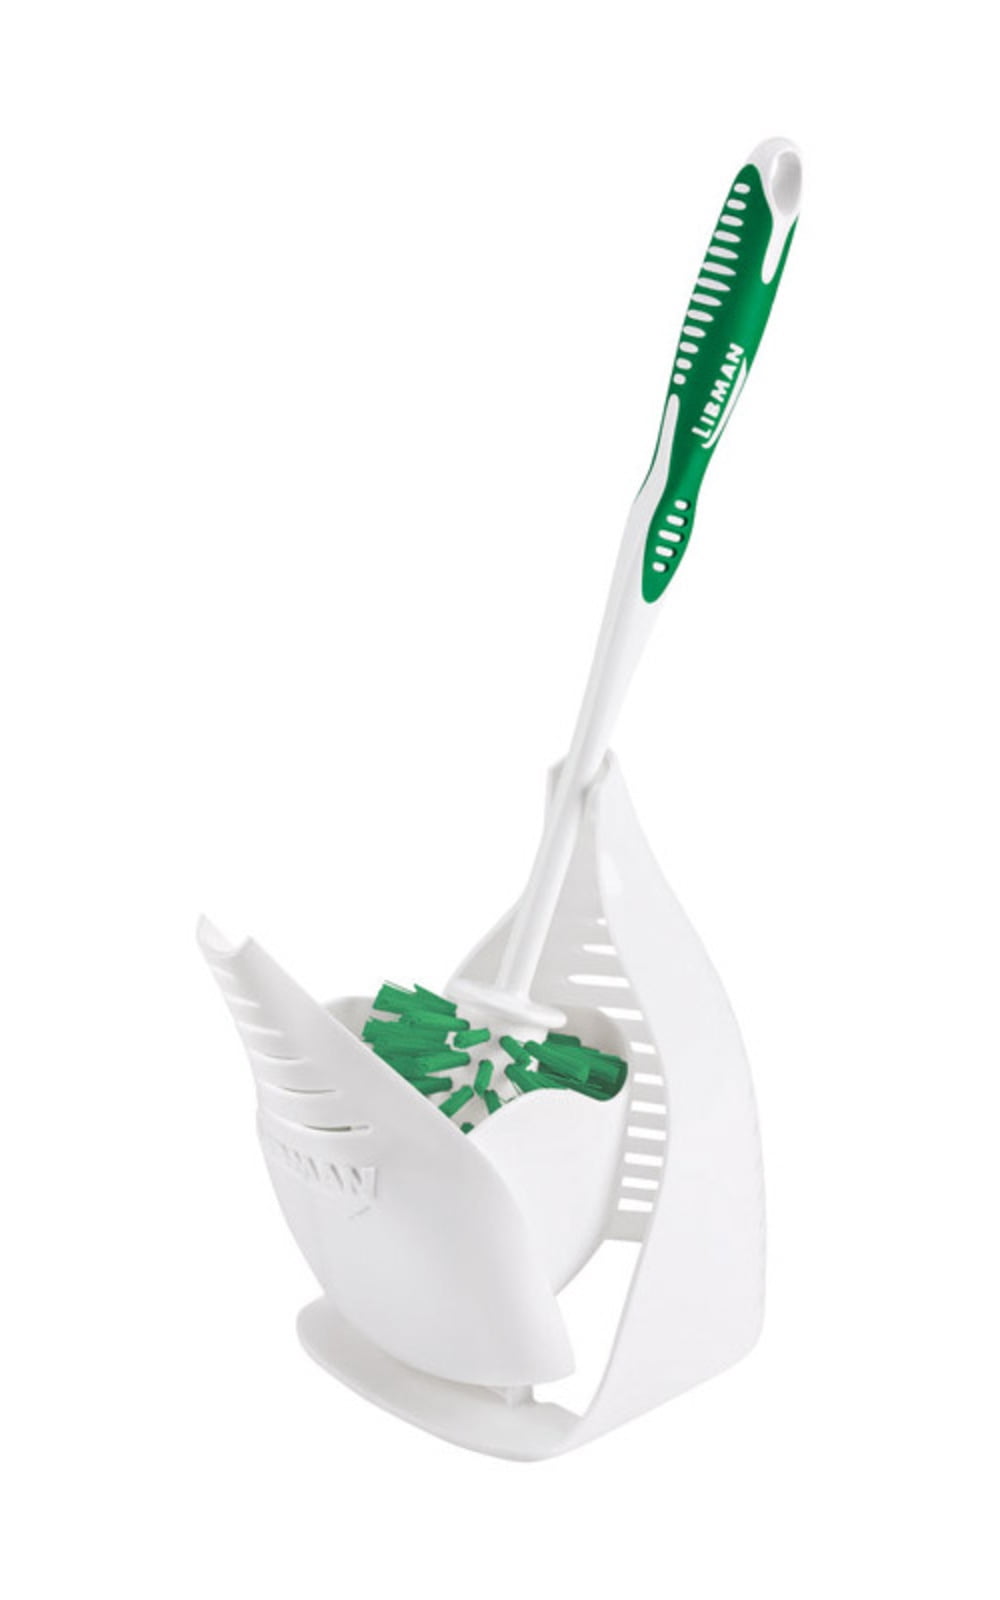 Libman Toilet Brush and Plunger Combo